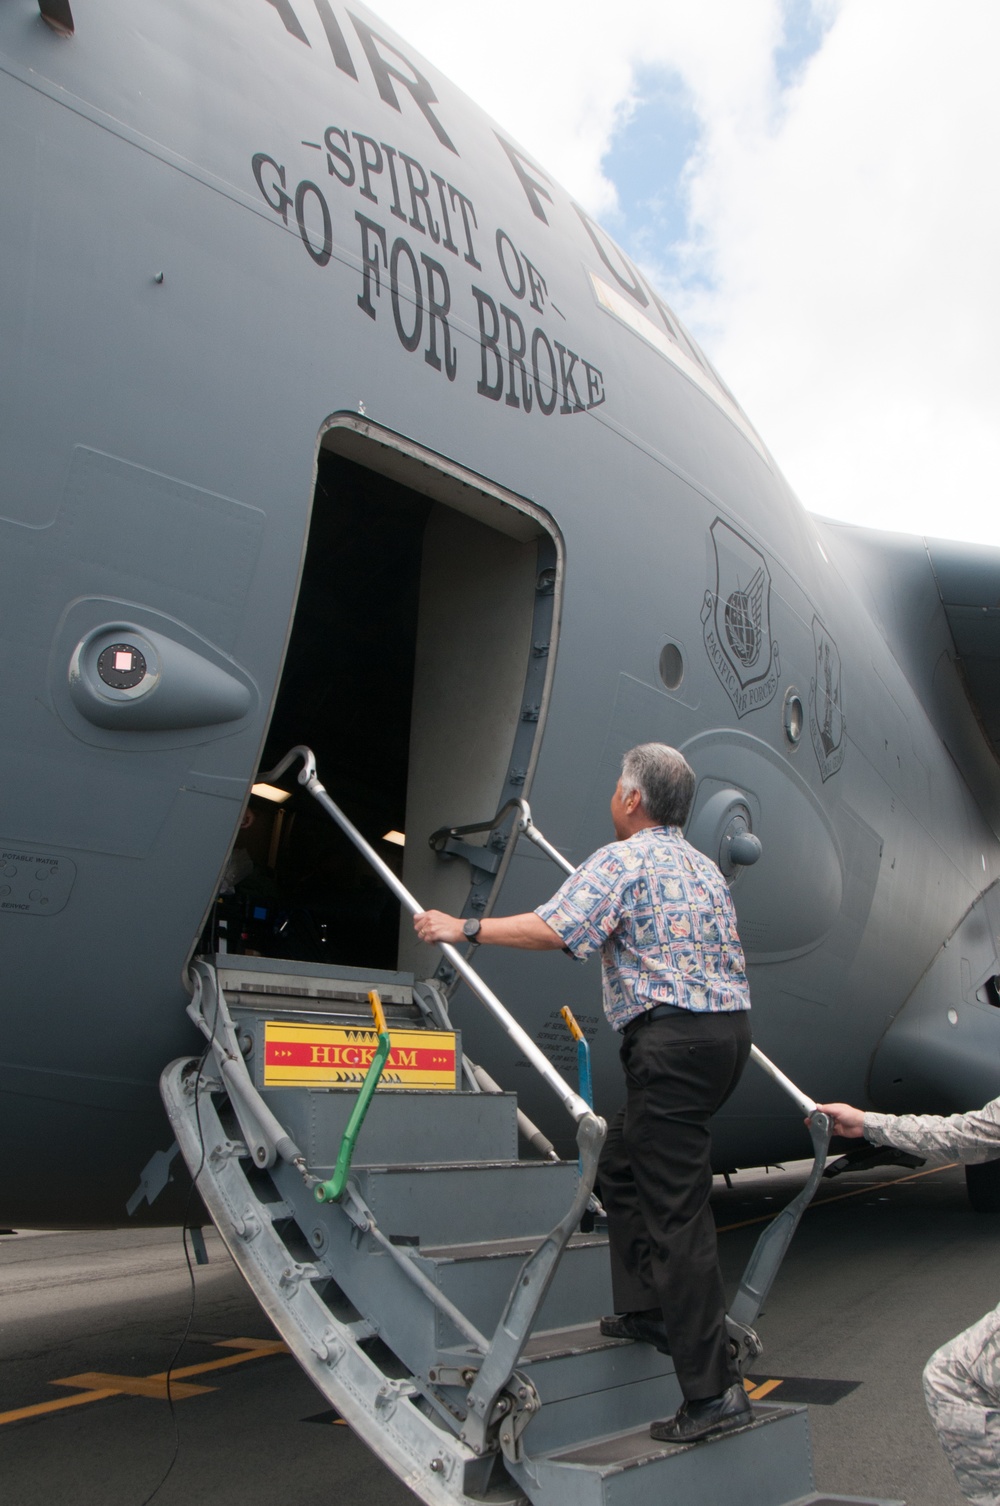 HIANG 204th Airlift Squadron returns from Hurricane Harvey relief mission.